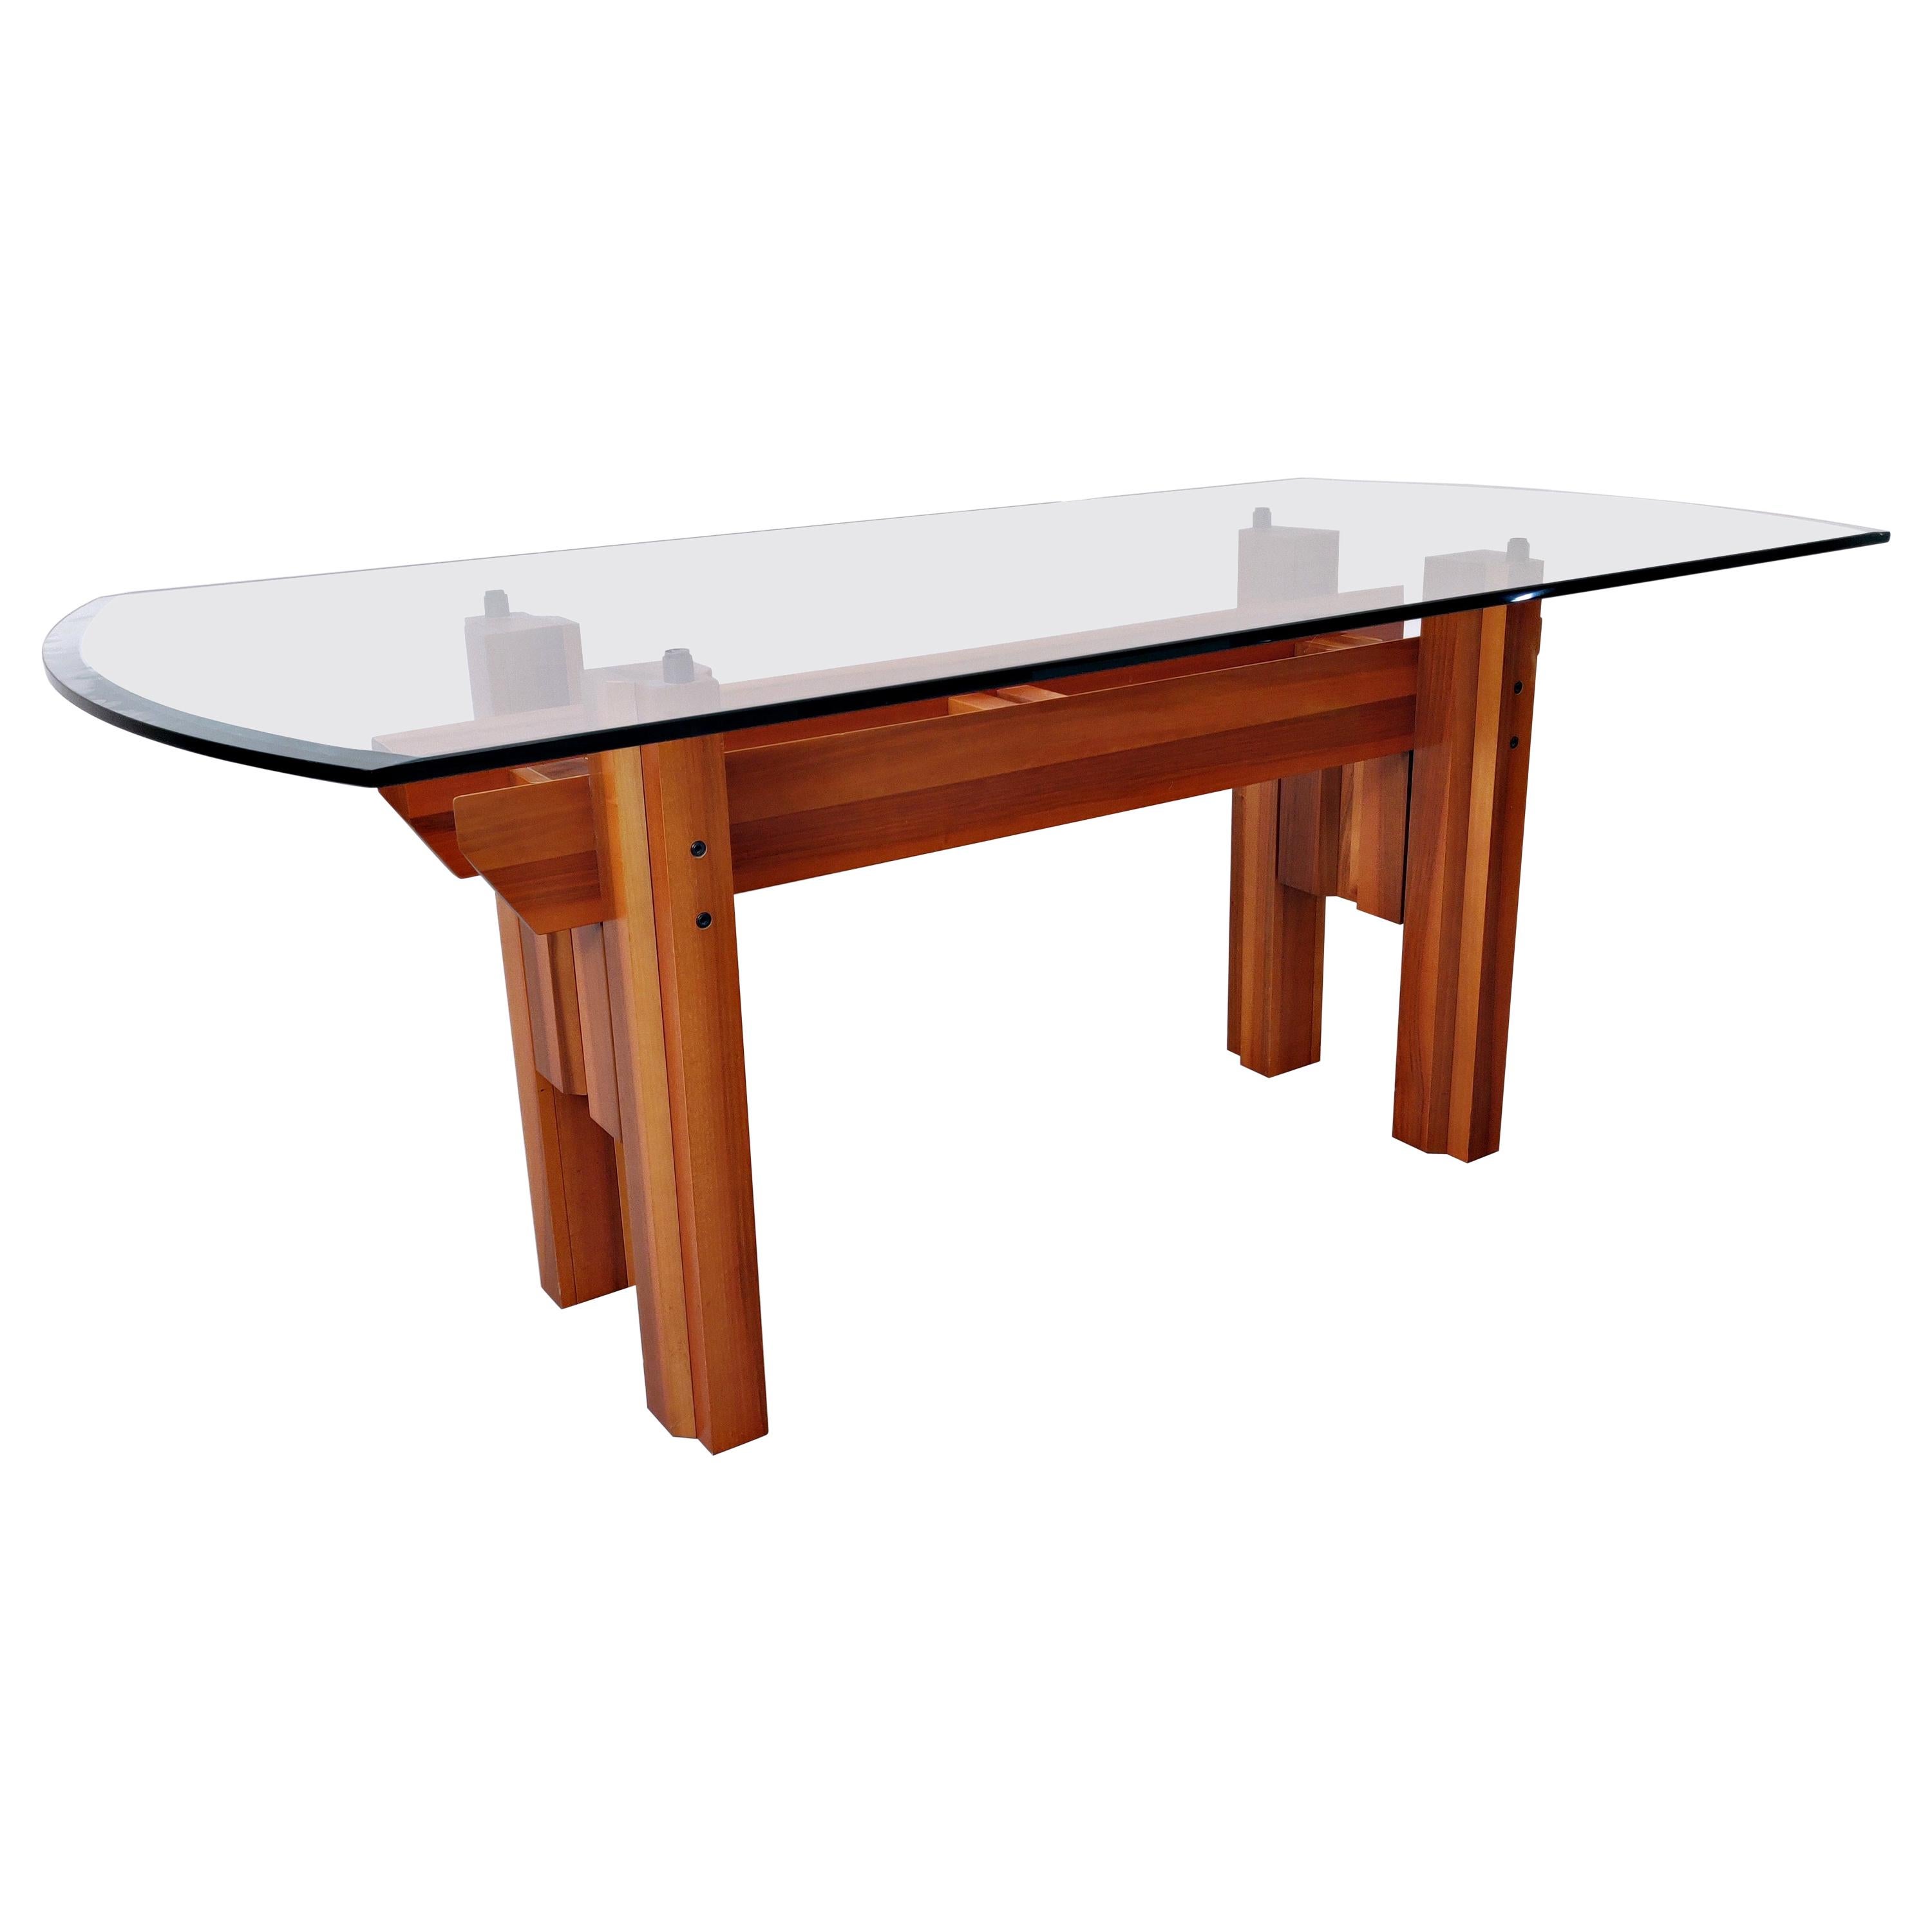 Italian Dining Table, Wood And Glass Top By Franco Poli For Bernini C. 1979 For Sale